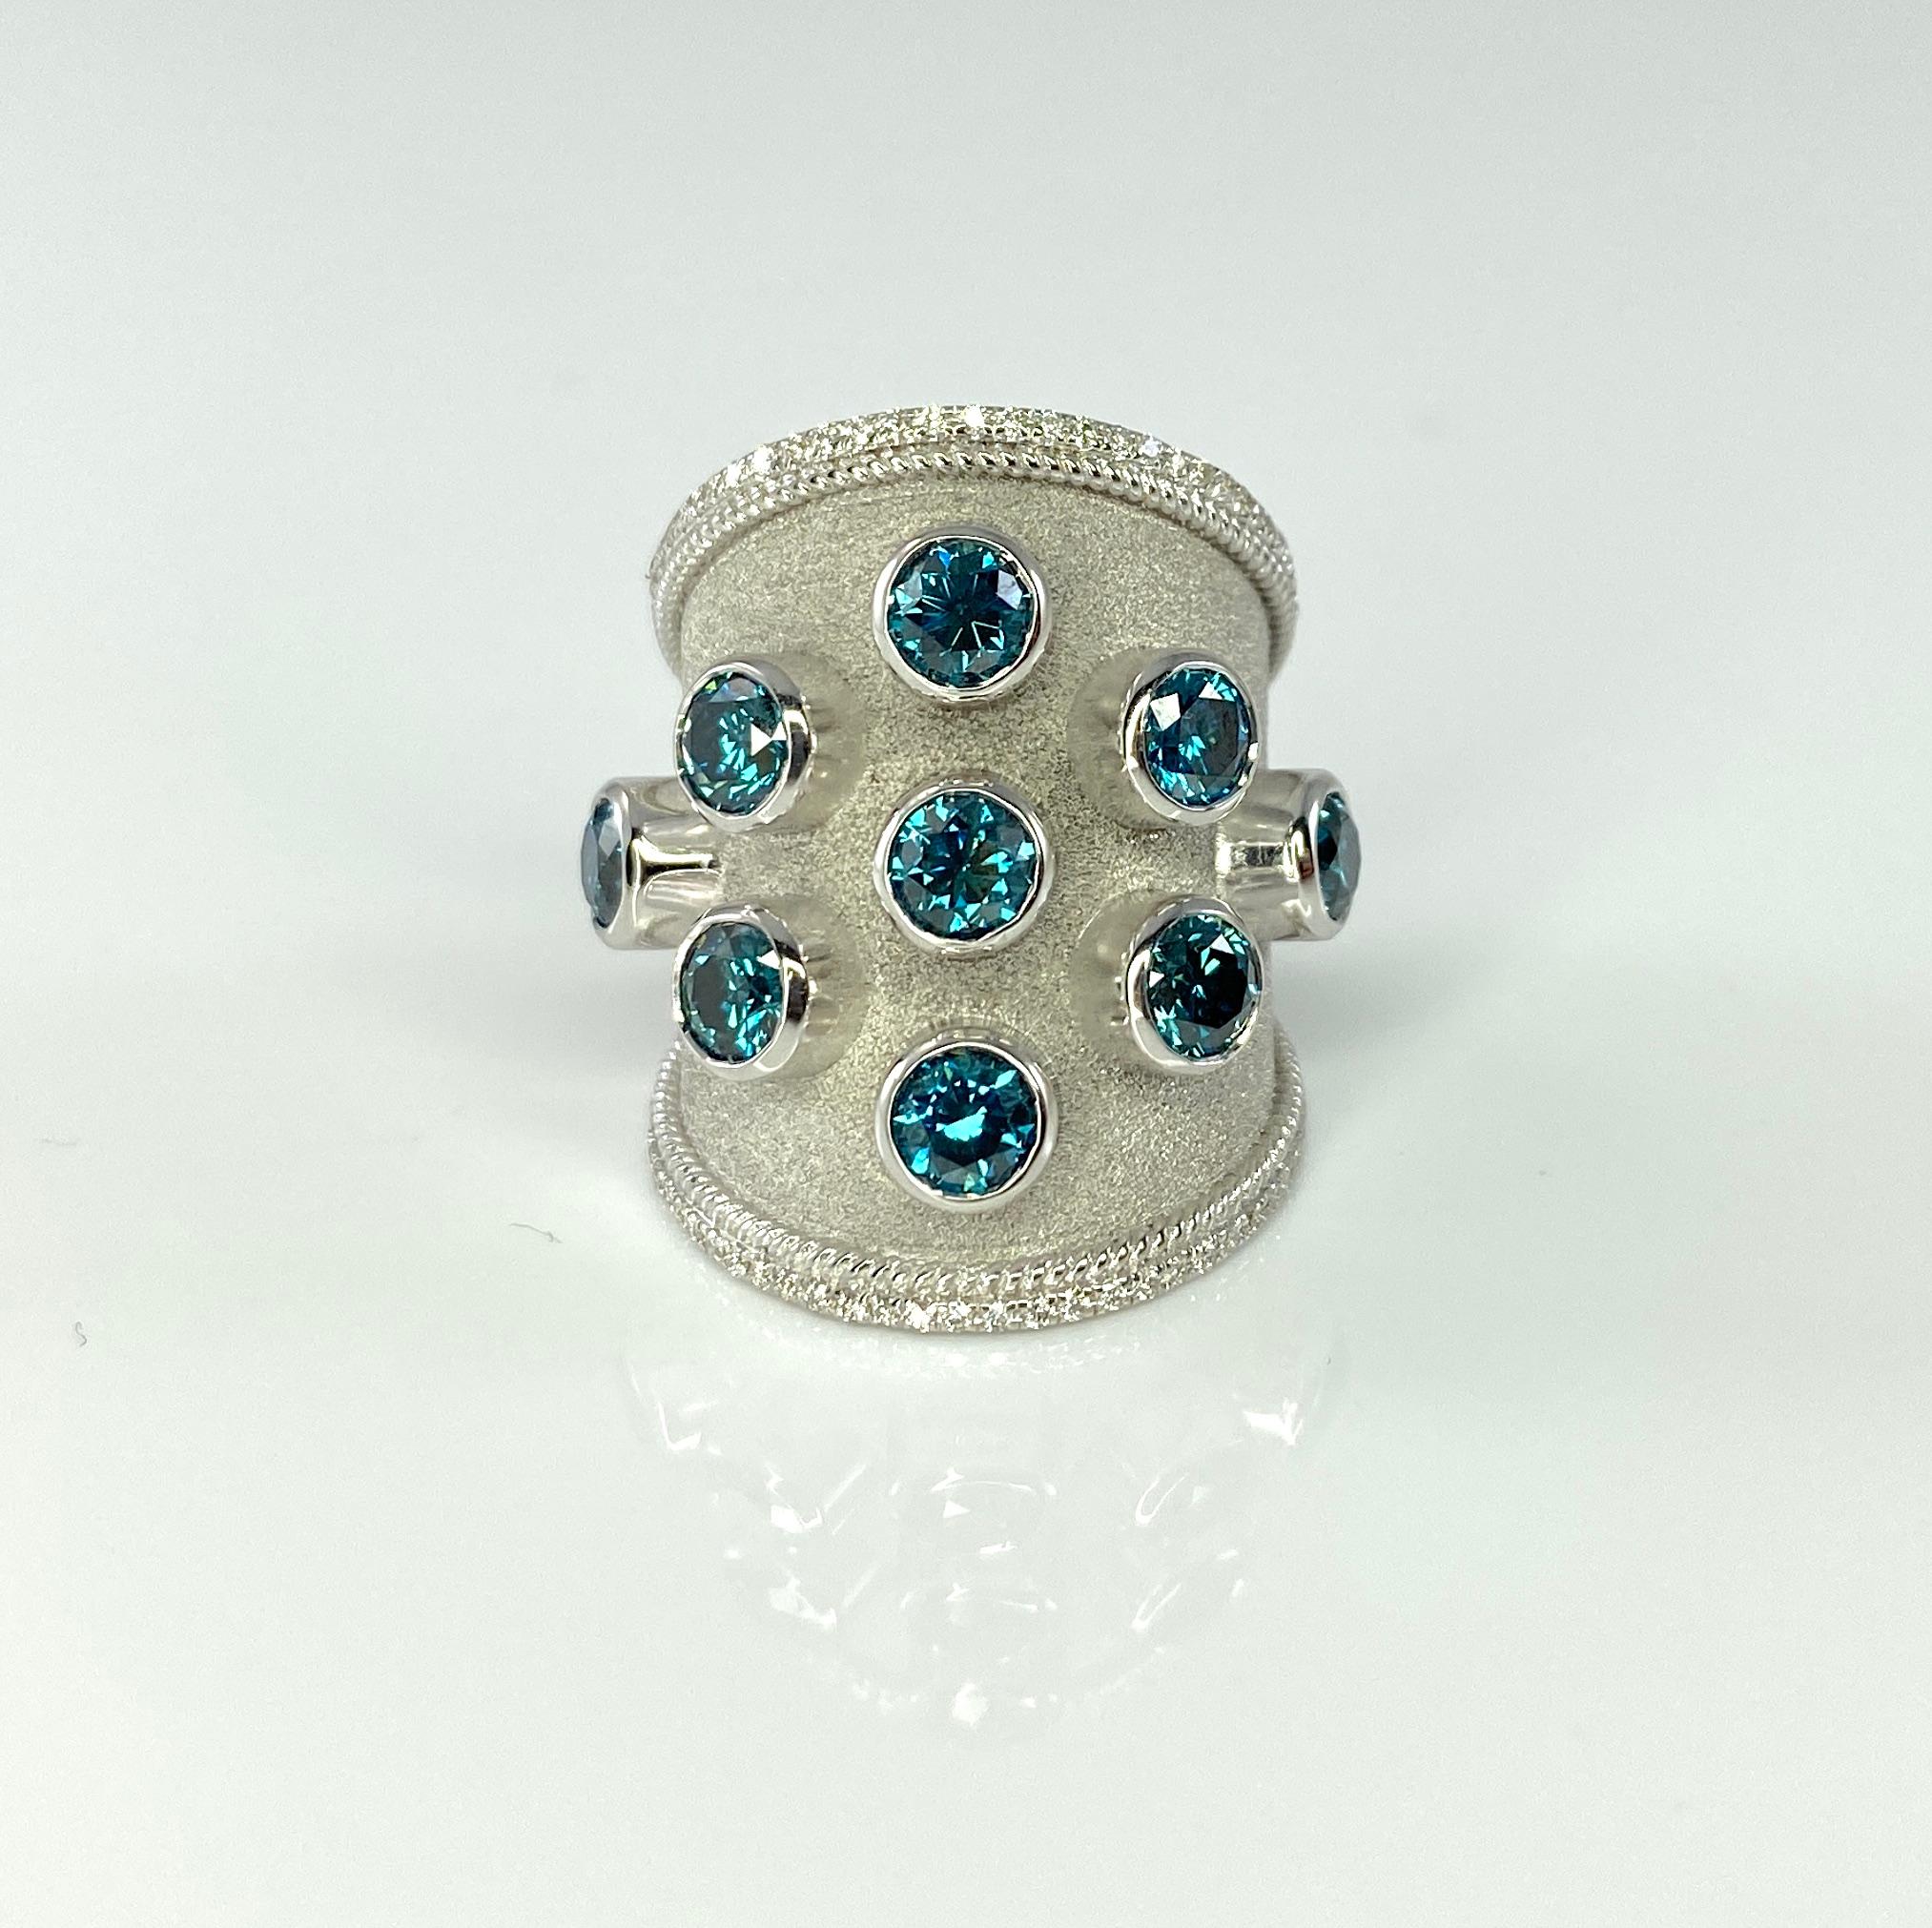 S.Georgios designer 18 Karat White Gold Thick Band Ring is handmade with Byzantine workmanship and a gorgeous velvet background done under a microscope. The beautiful ring features 9 Brilliant cut Blue Diamonds total weight of 2.68 Carats and